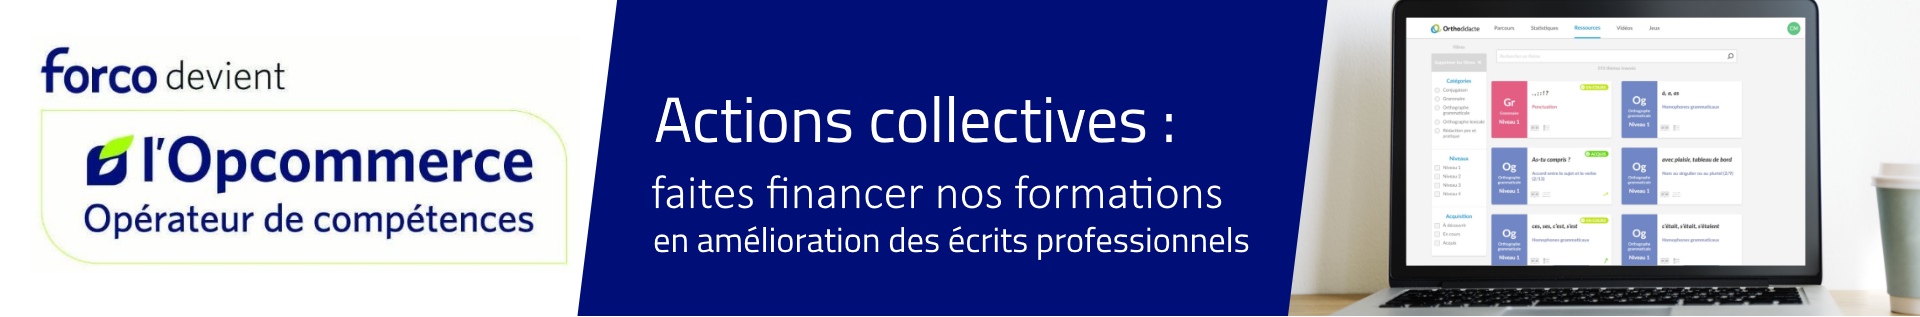 forco-actions-collectives-mai2019